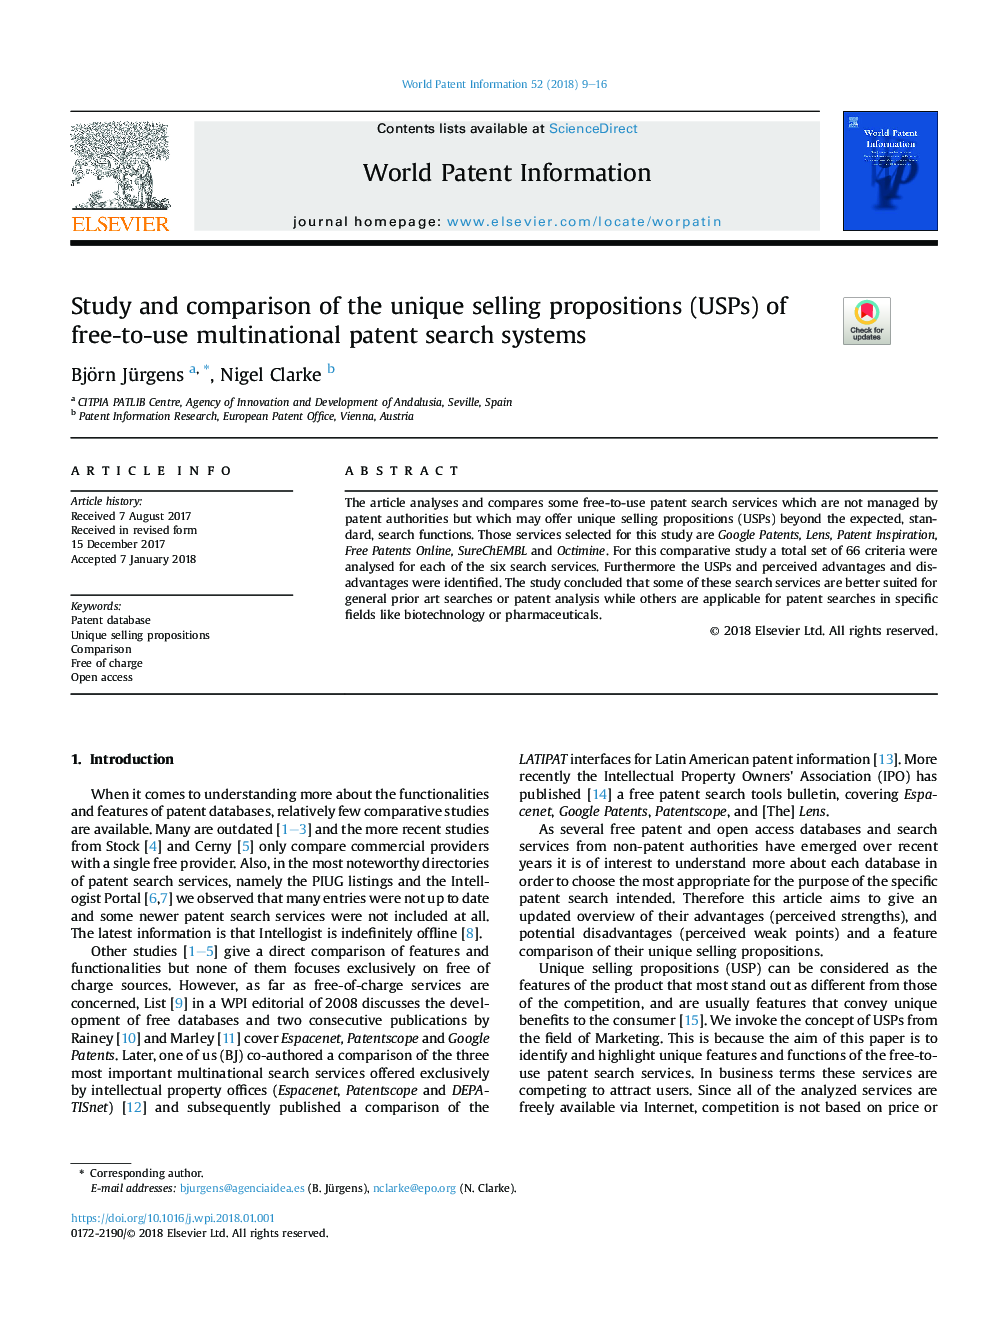 Study and comparison of the unique selling propositions (USPs) of free-to-use multinational patent search systems